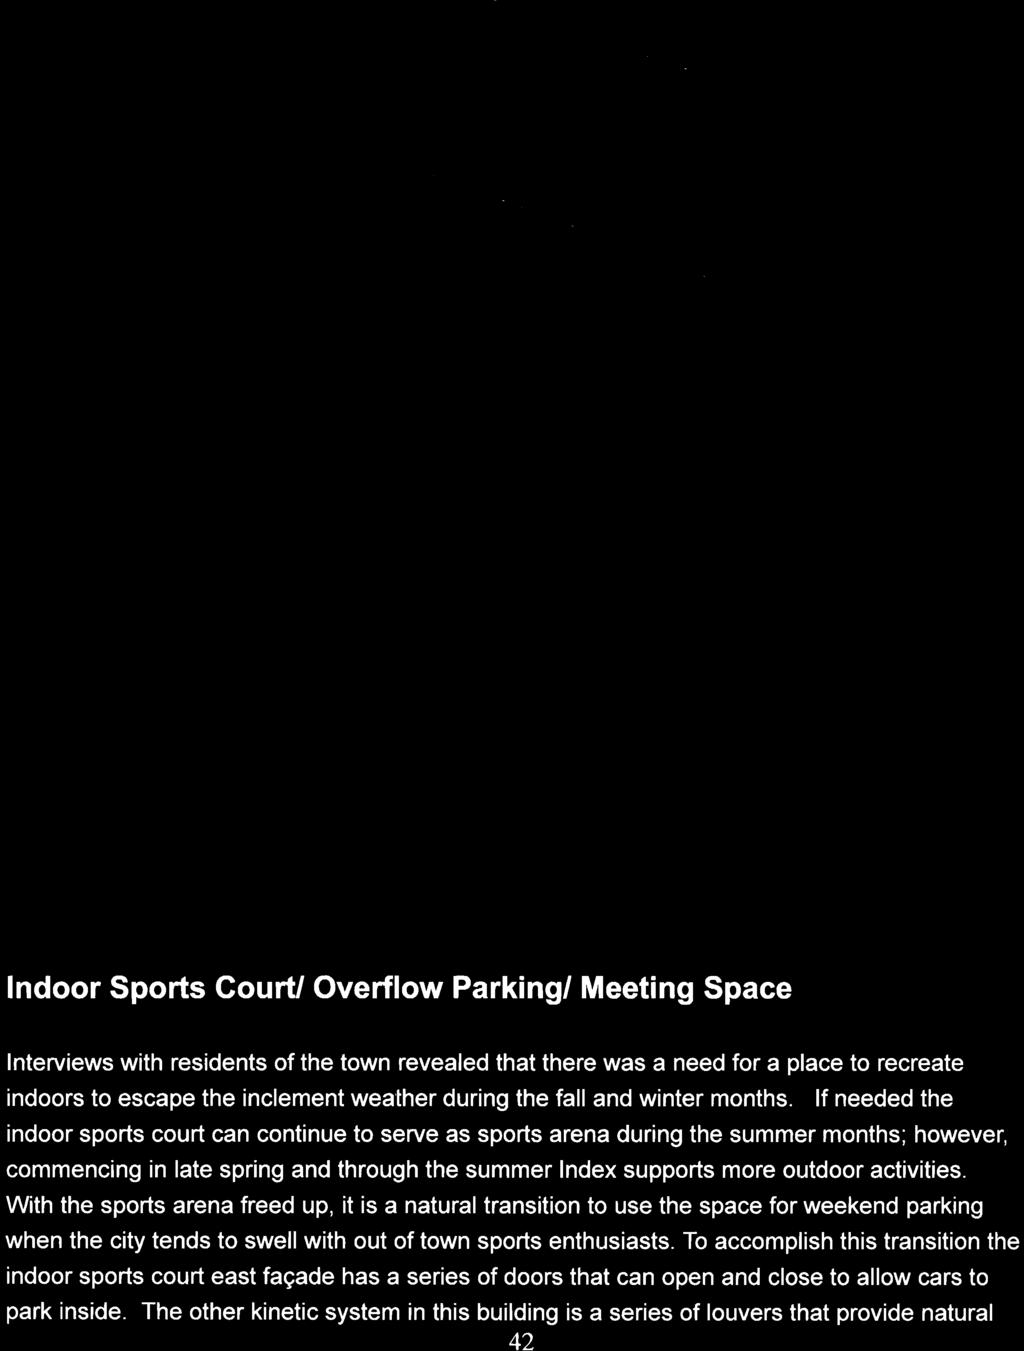 With the sports arena freed up, it is a natural transition to use the space for weekend parking when the city tends to swell with out